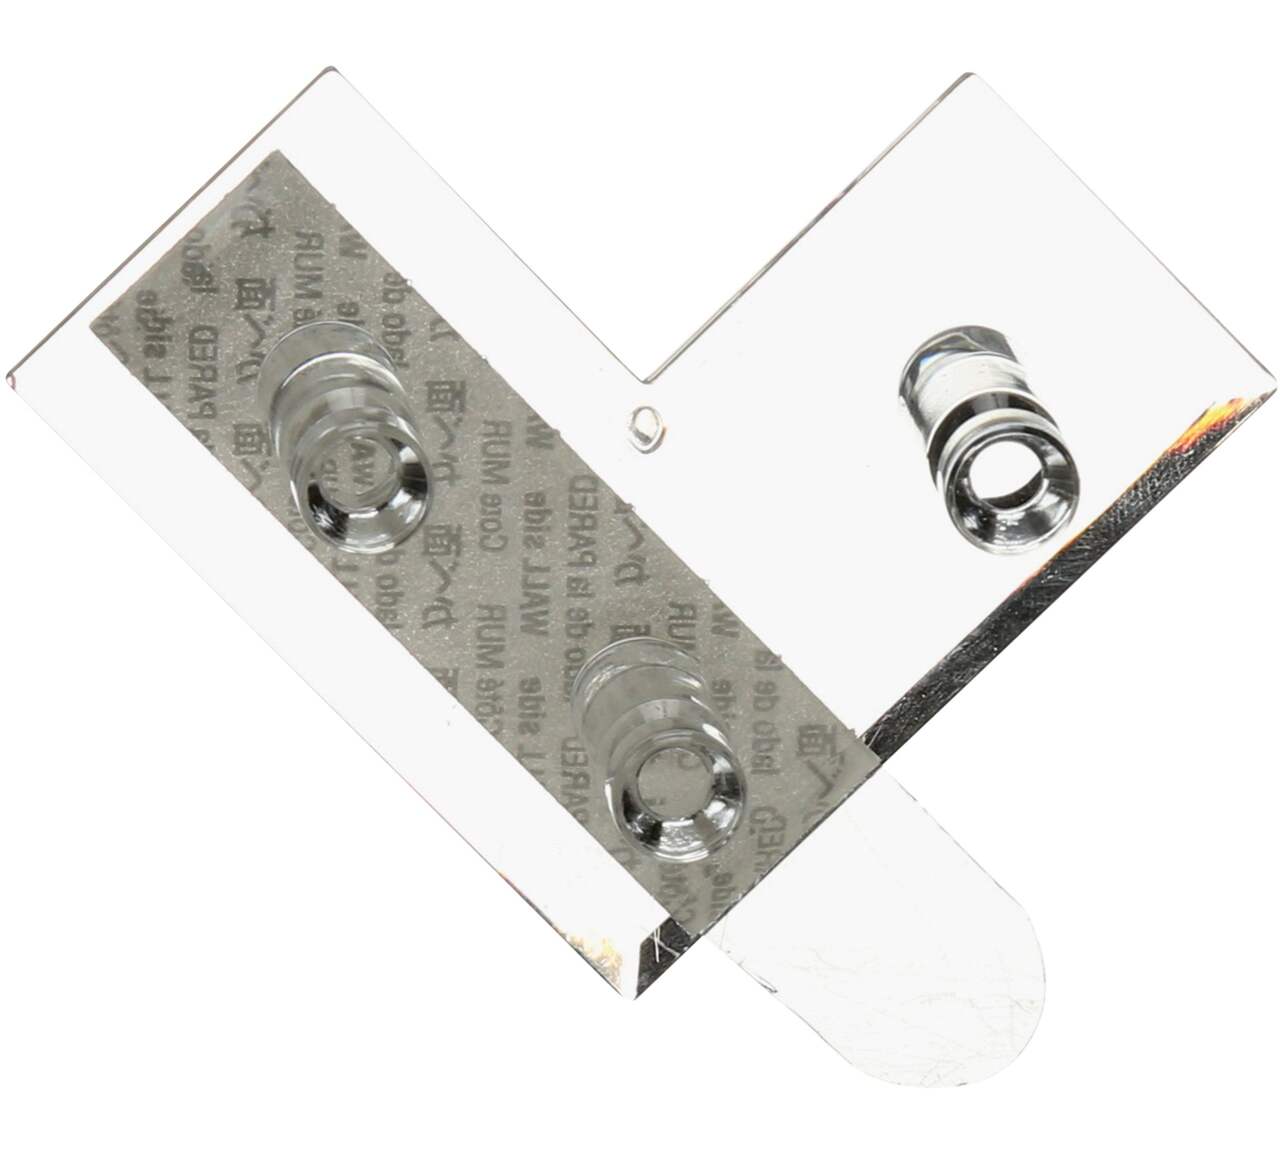 Command Jewelry Organizing Rack Hooks with Adhesive Strips, Clear, 1-lb, 2  Strips per Pack